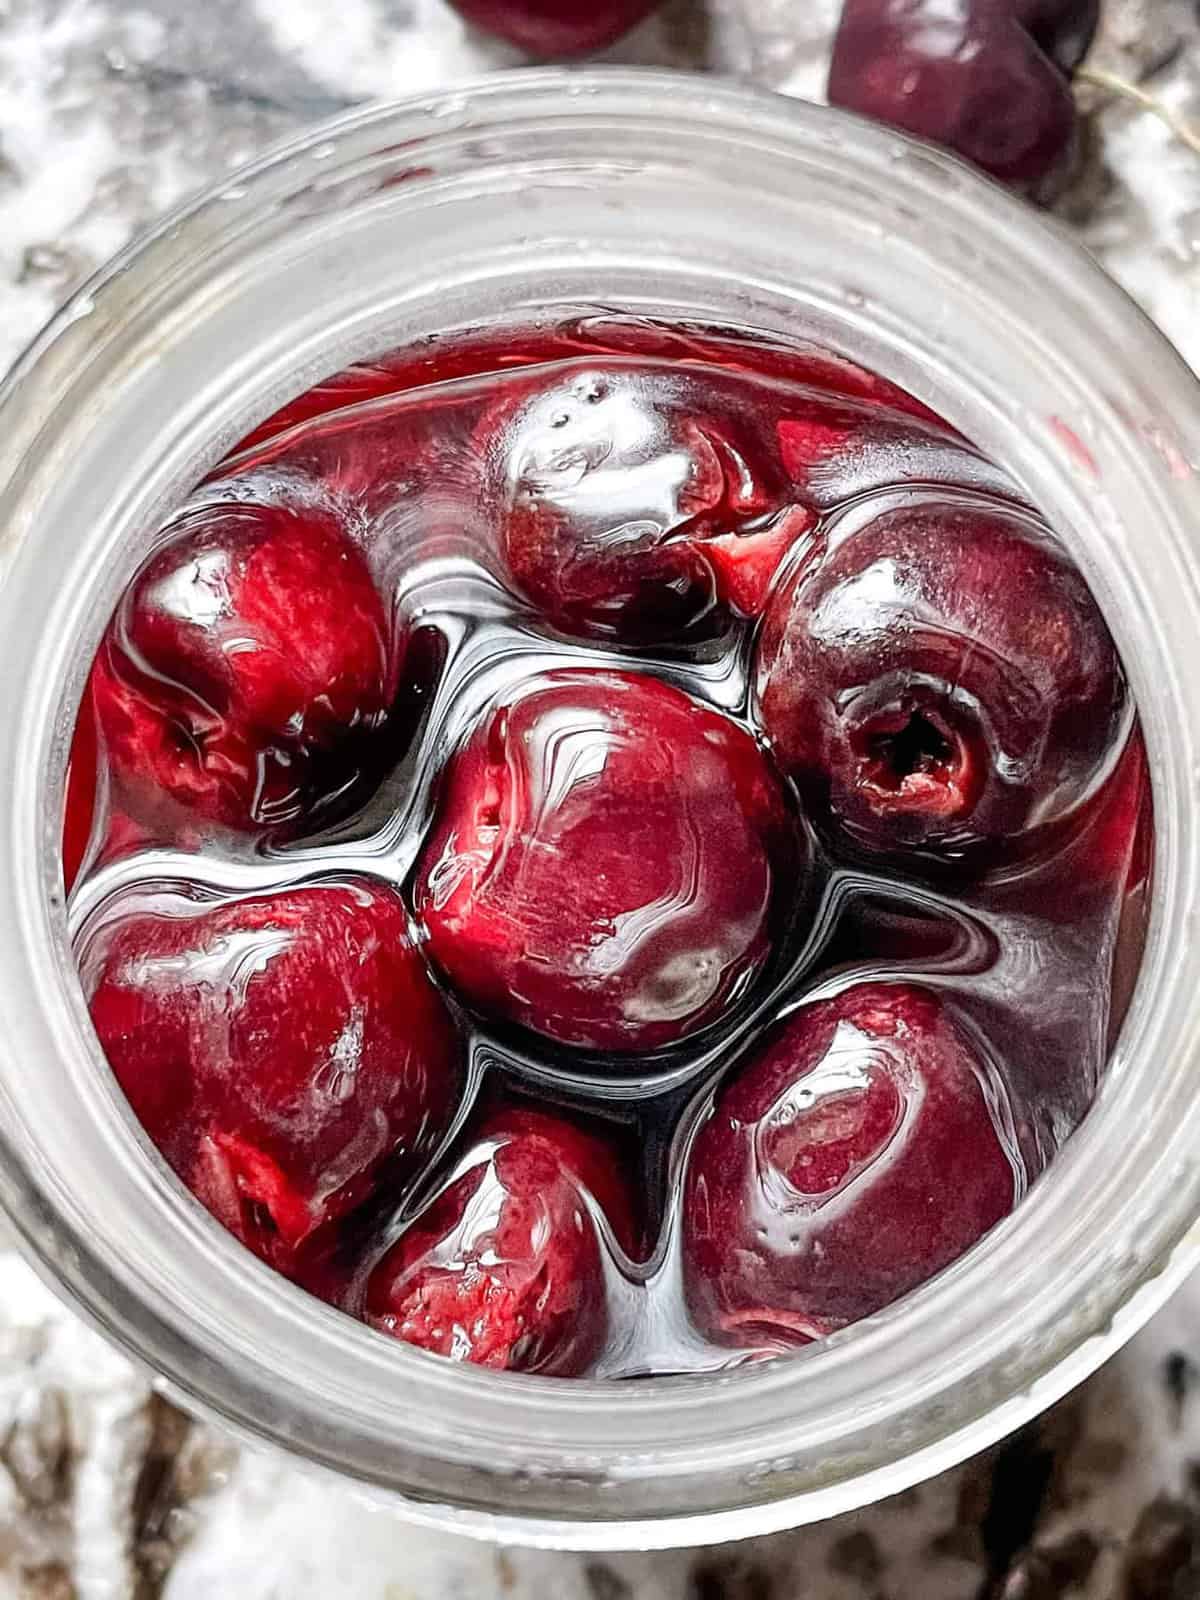 Image showing top down view of brandied cherries in a glass jar.